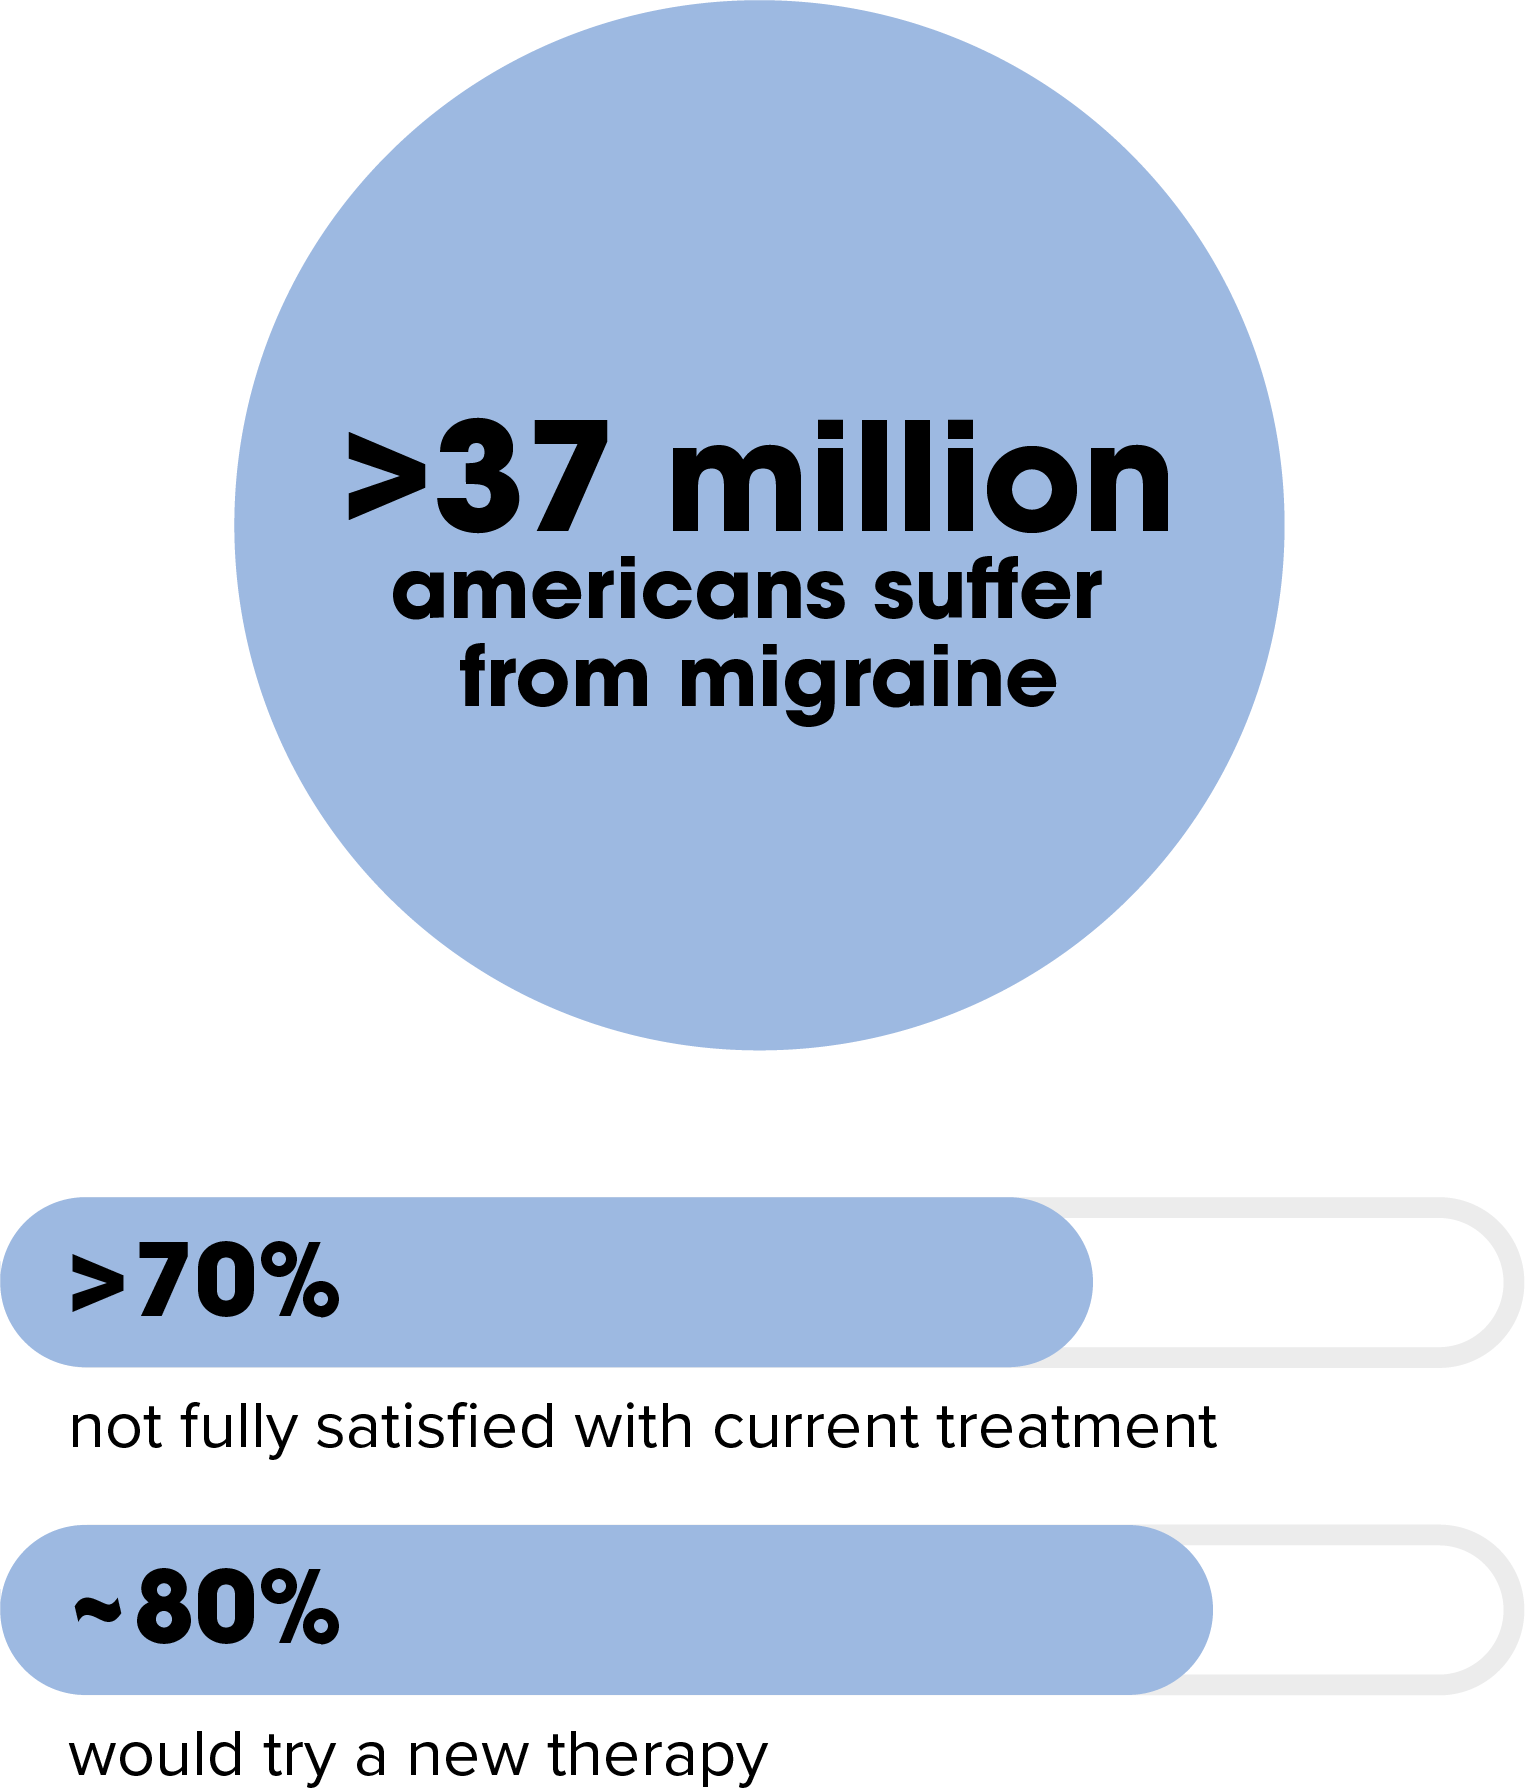 More than 37 million Americans suffer from migraines, 70% are not fully satisfied with current treatment, around 80% would try a new therapy